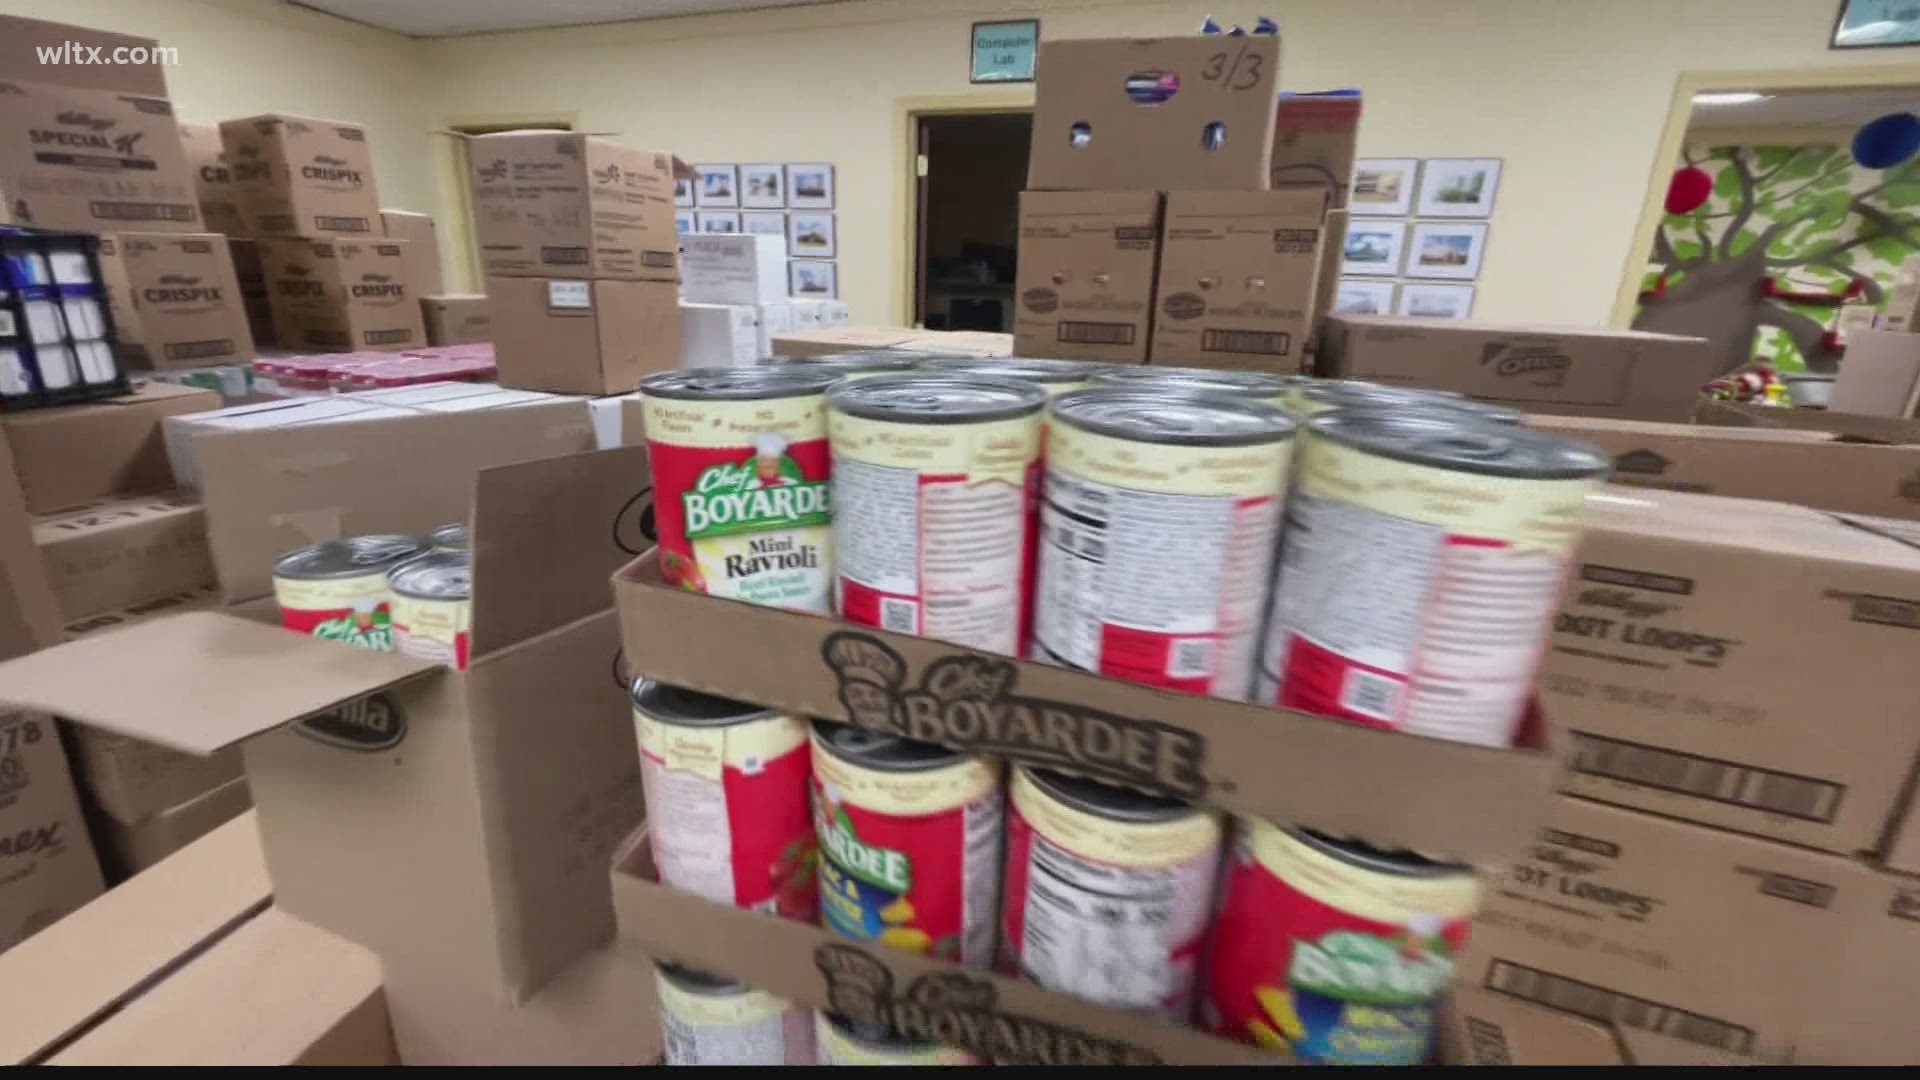 The outreach center is helping serve around 700 people a month at their location in Chapin. They're serving a little bit more than that with their mobile food drop.